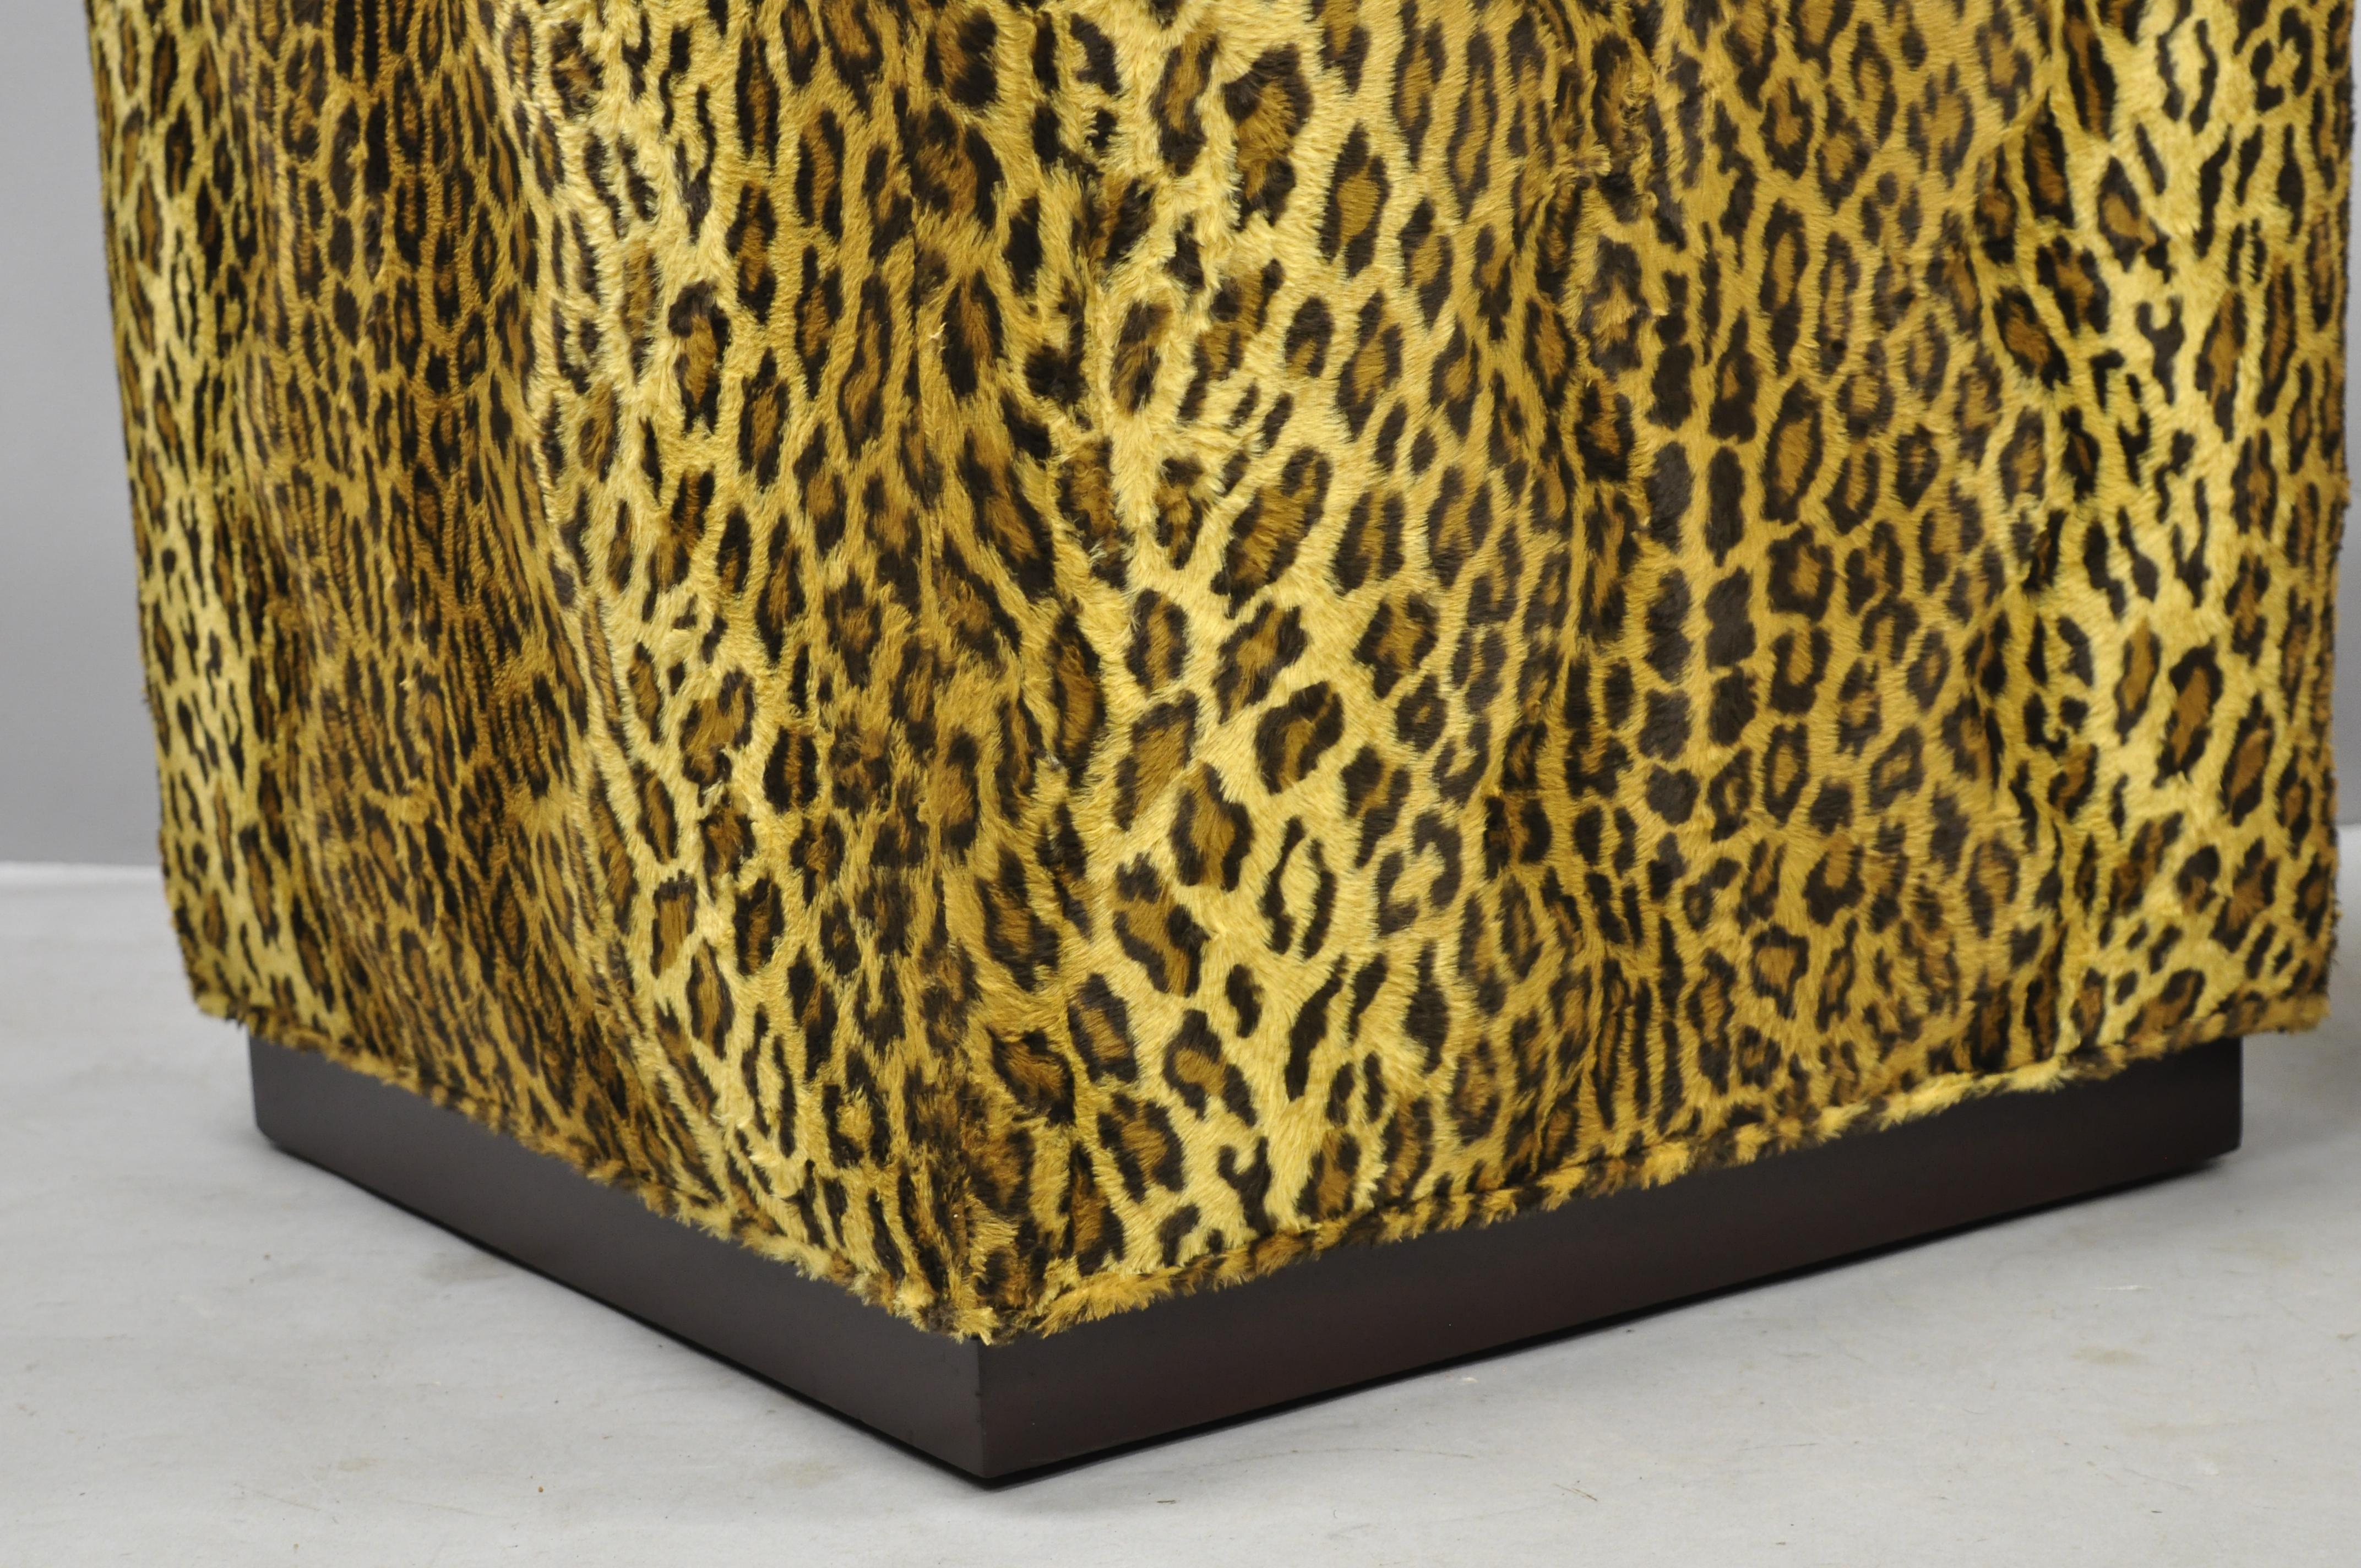 Contemporary Pair of Colby Cube Ottoman Stools Leopard Cheetah Print Fabric by Barclay Butera